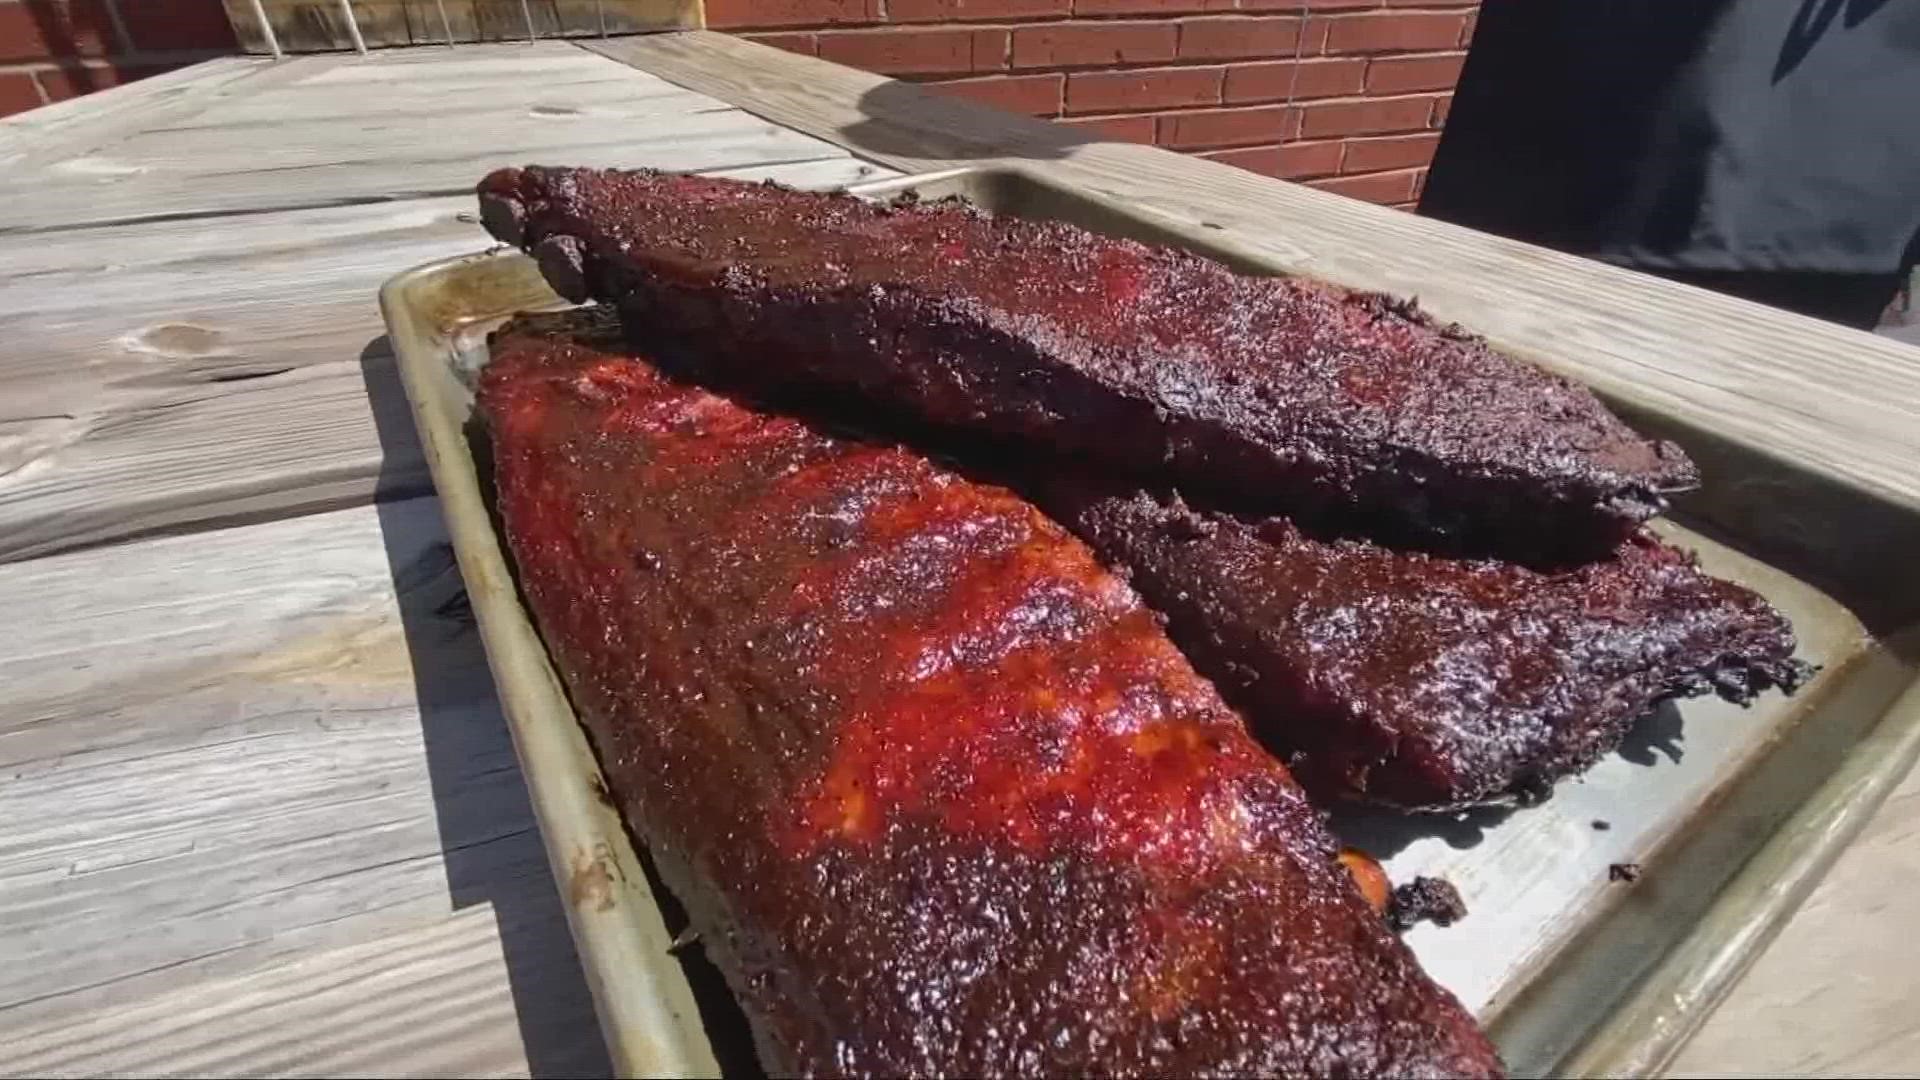 Hungry? You will be! 3News' Austin Love takes us to the Smokin' Rock N' Roll food truck for some Cleveland barbecue.